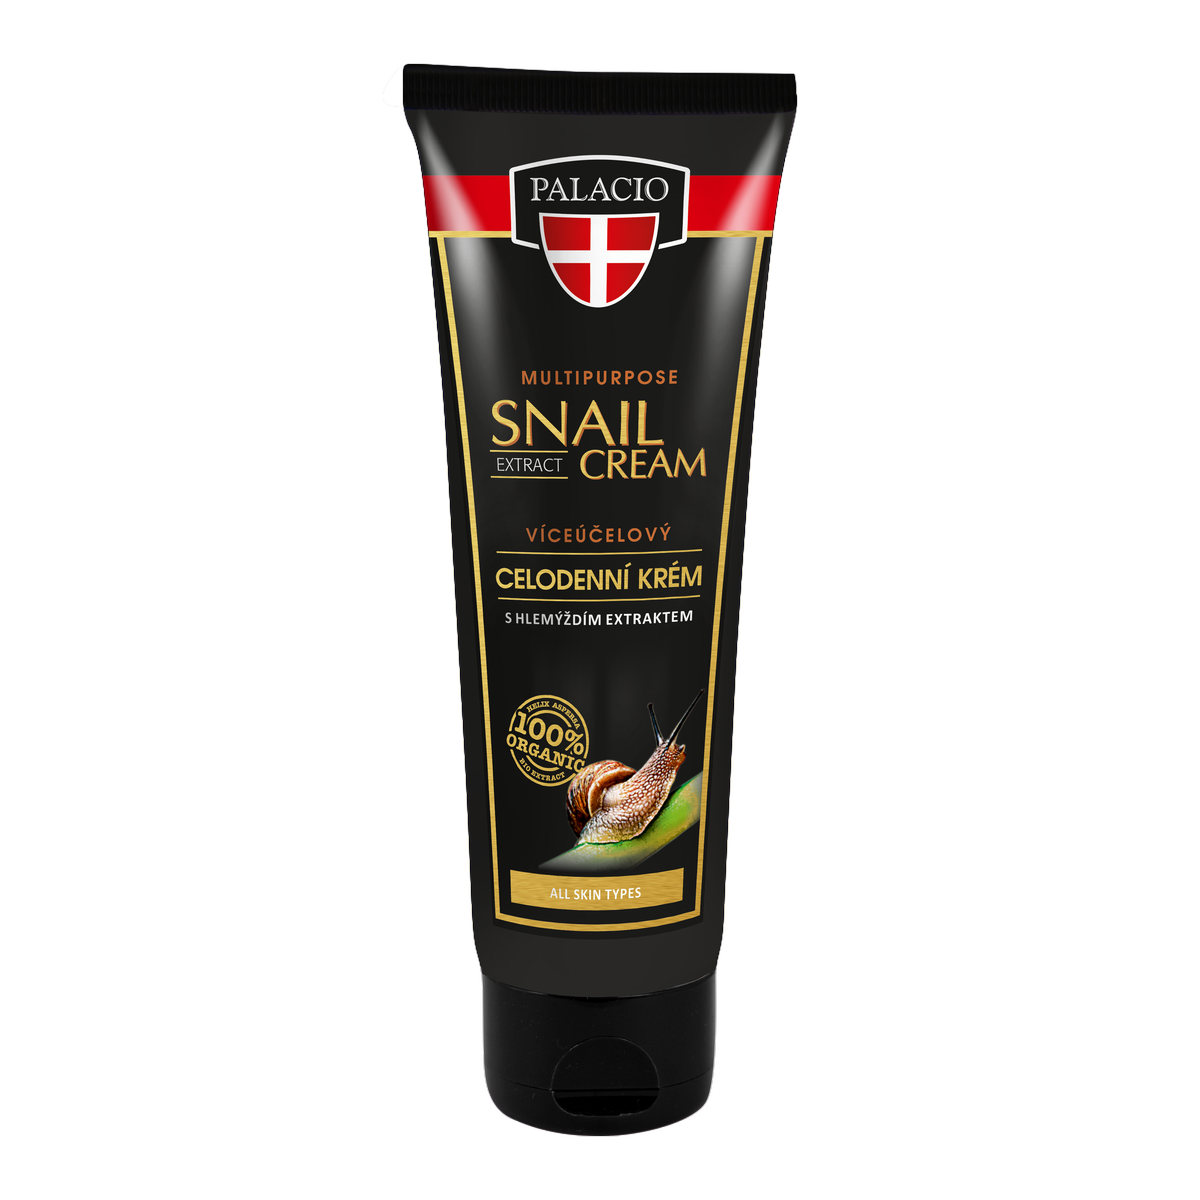 SNAIL EXTRACT Multipurpouse Cream 125ml P1305 ENG WEB 108